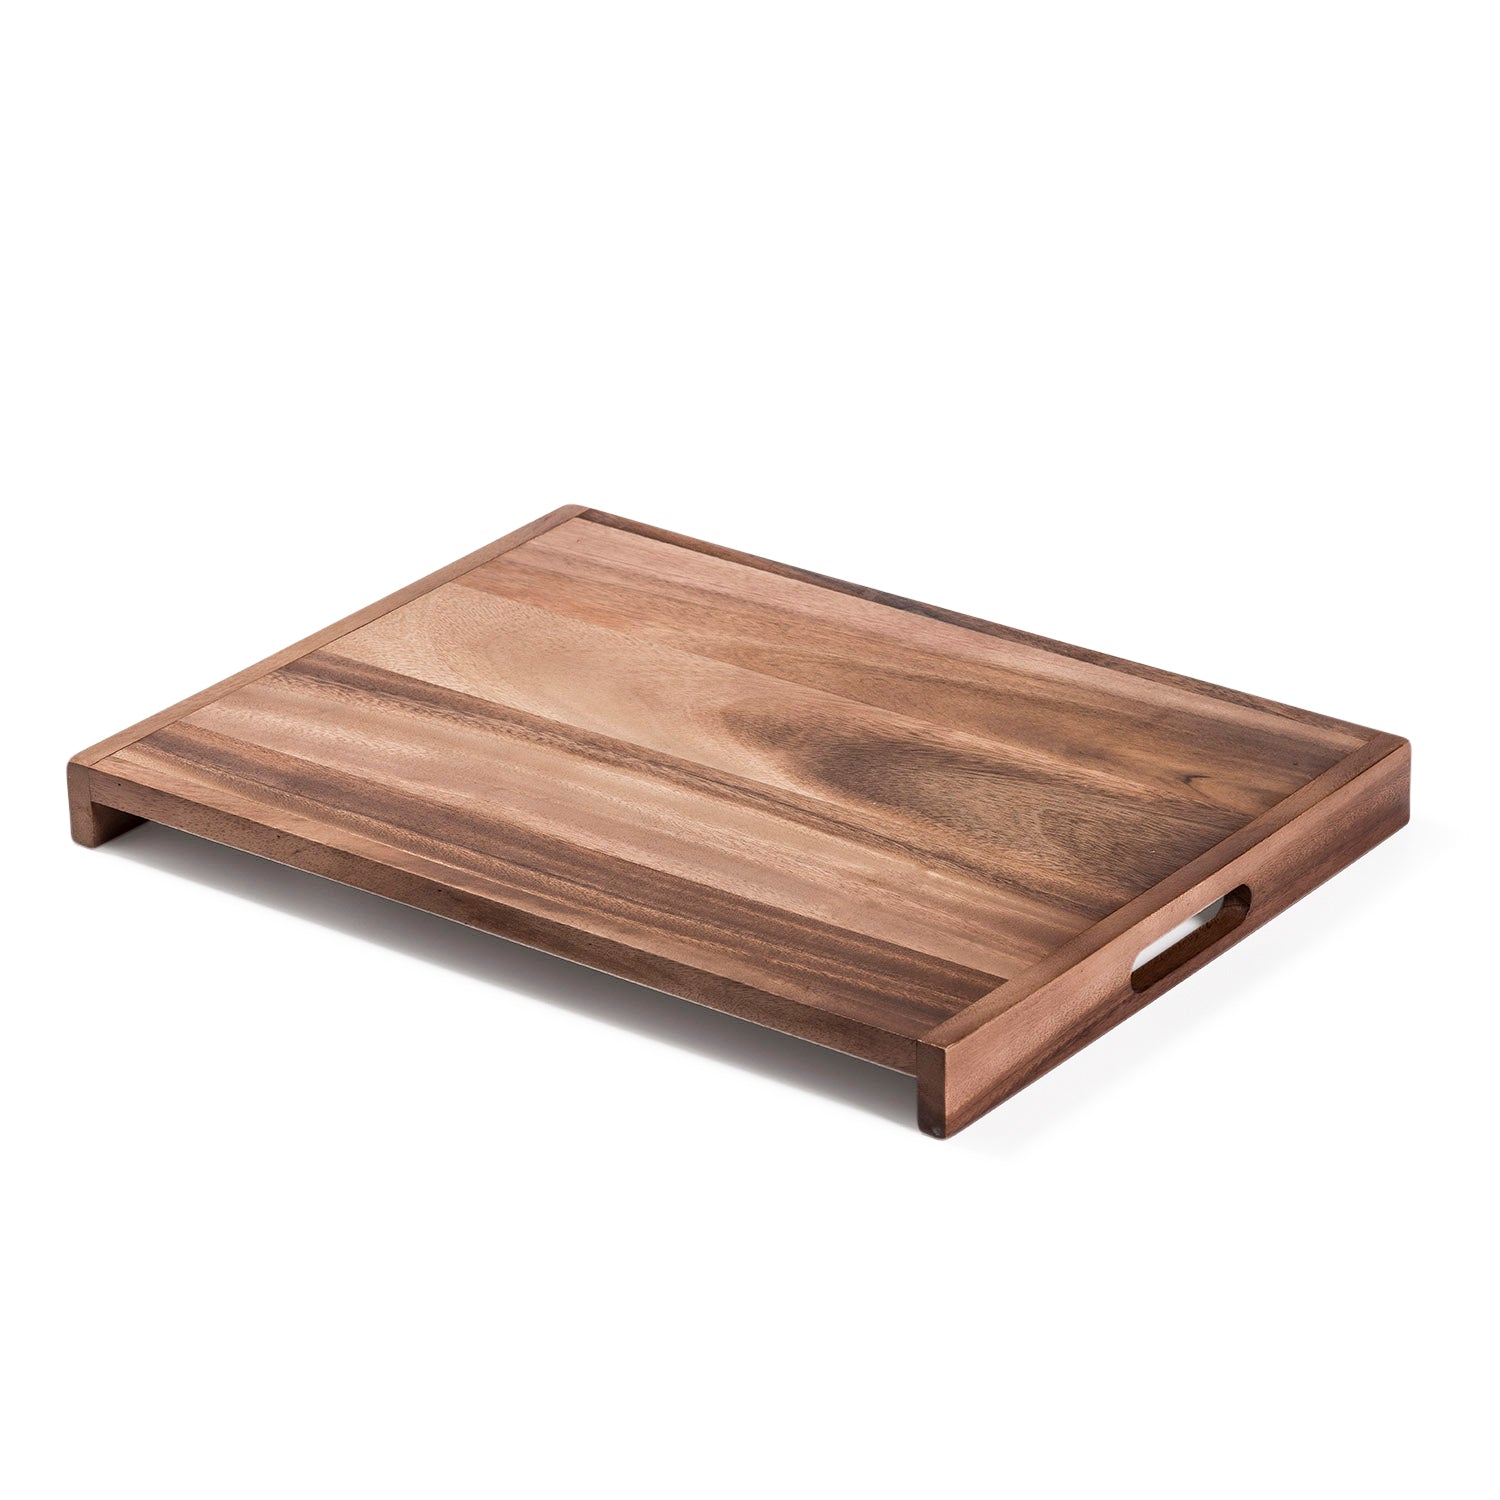 20 x 15 Inch Rectangular Walnut Wood Serving and Coffee Table Tray with  Handles